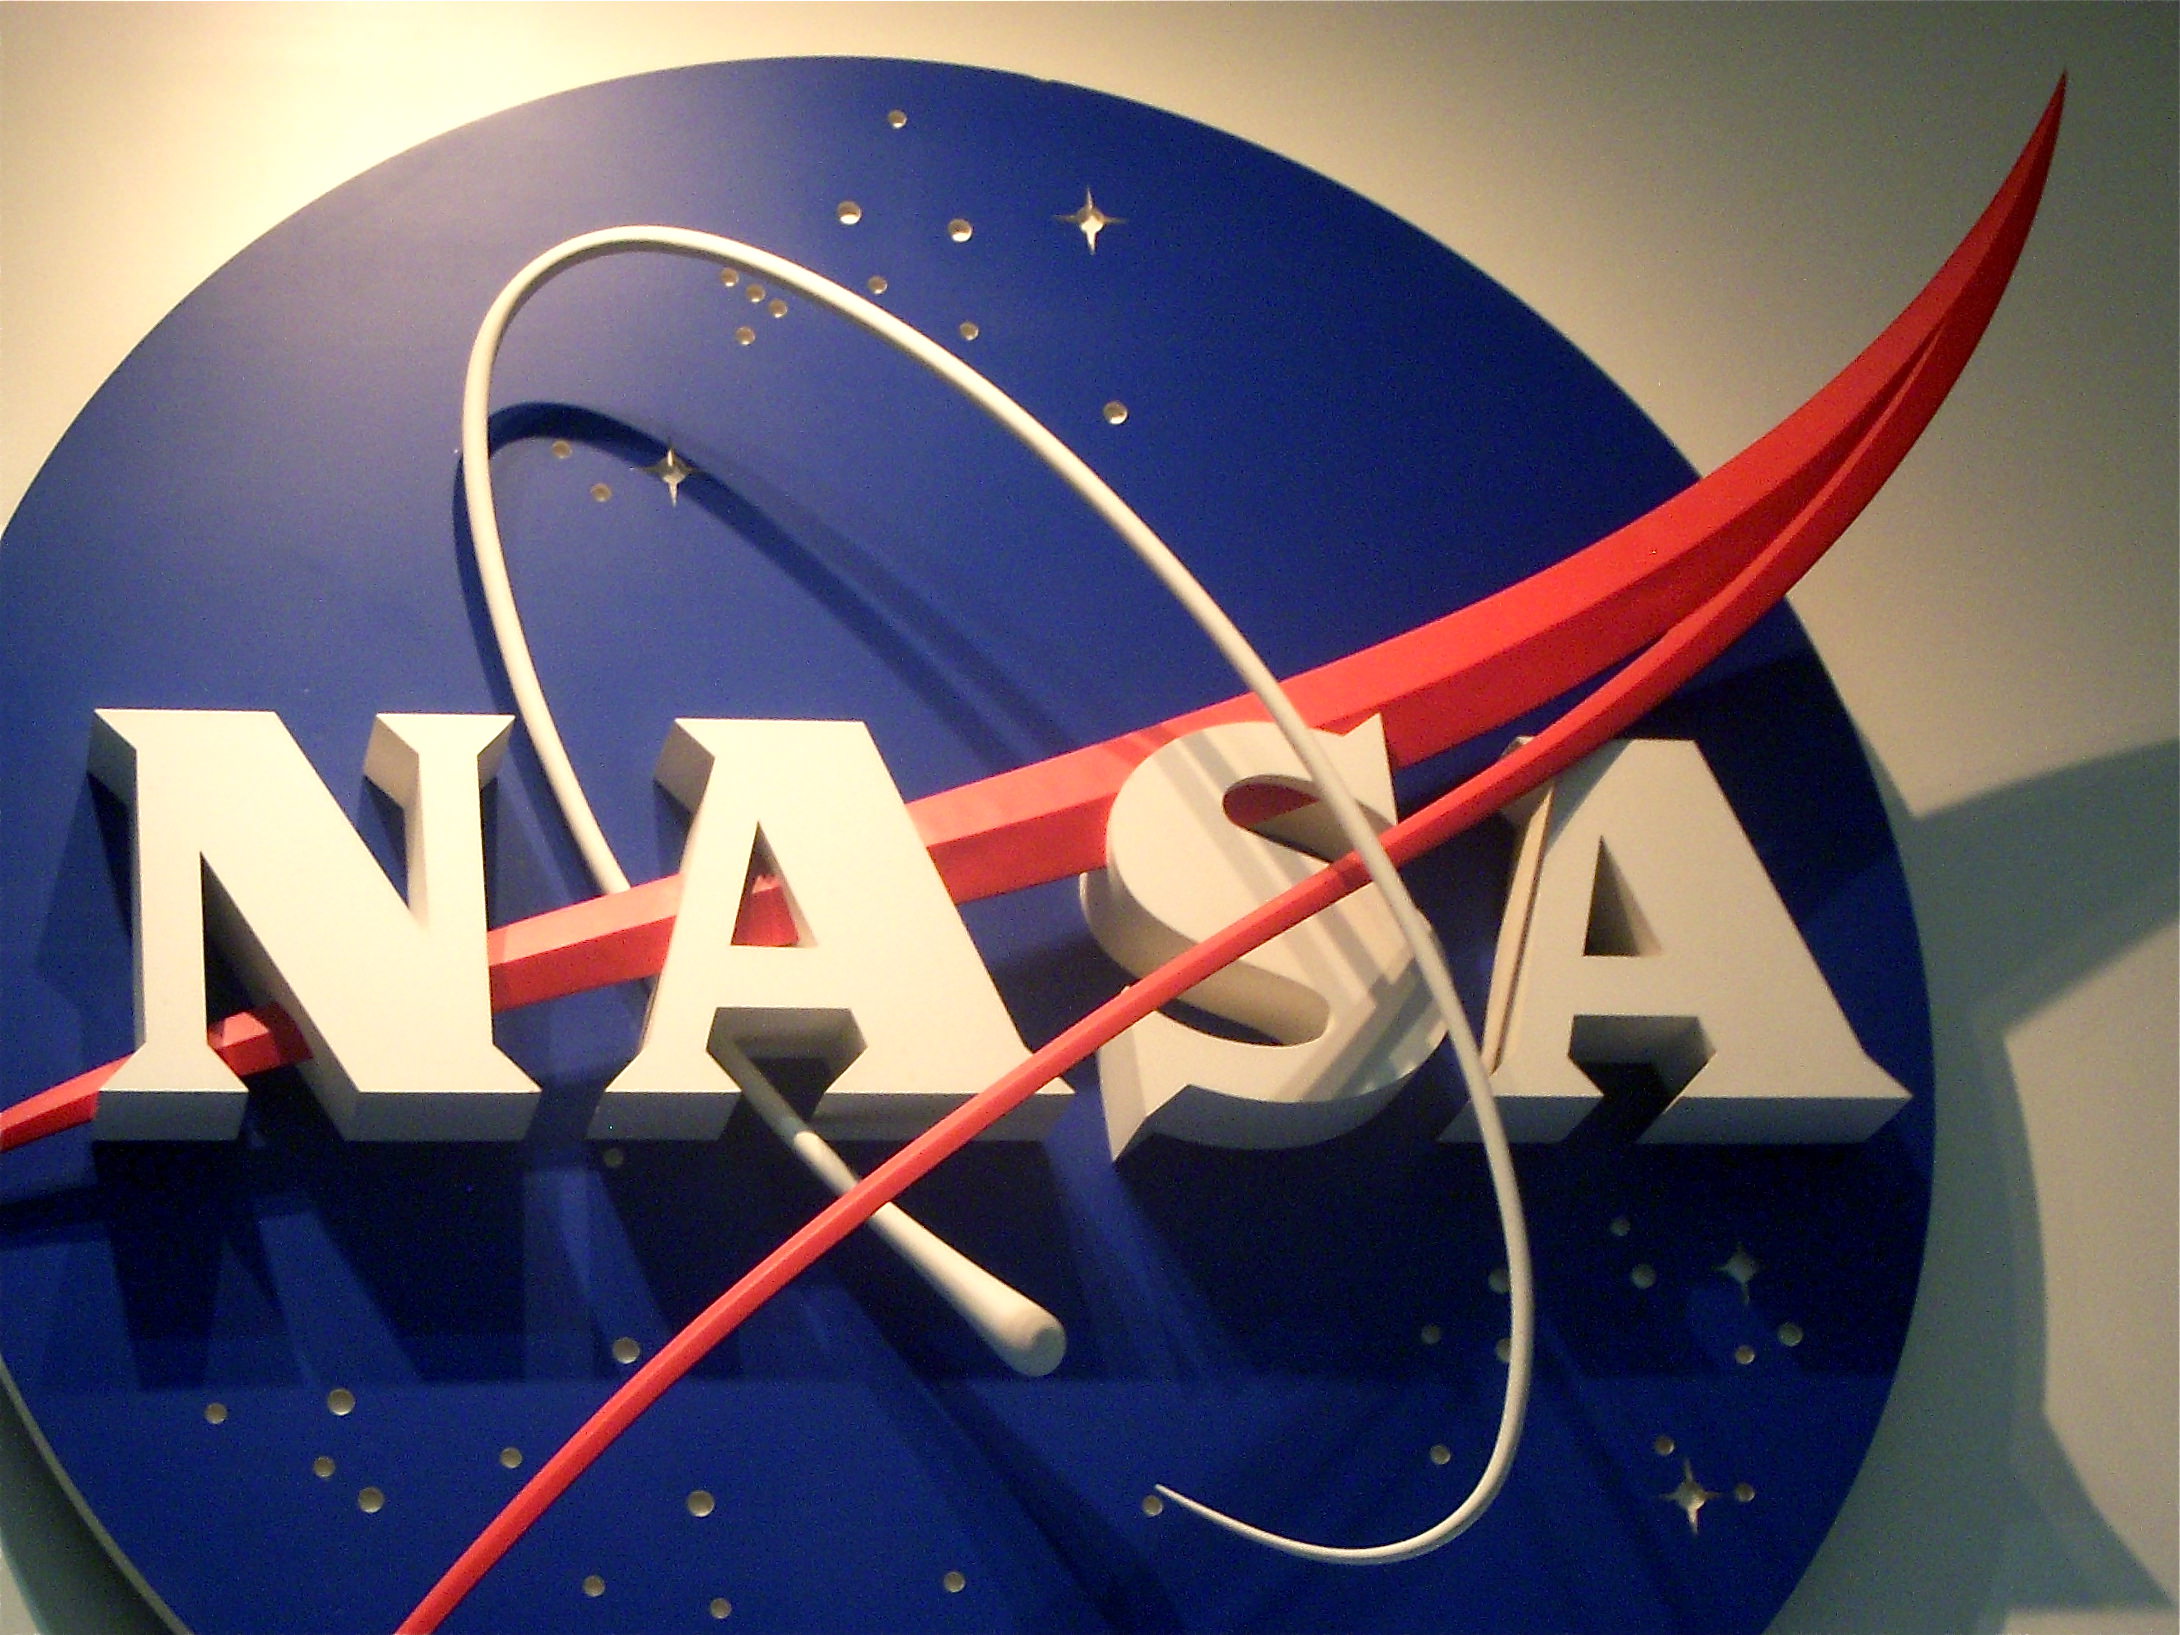 nasa meaning in english